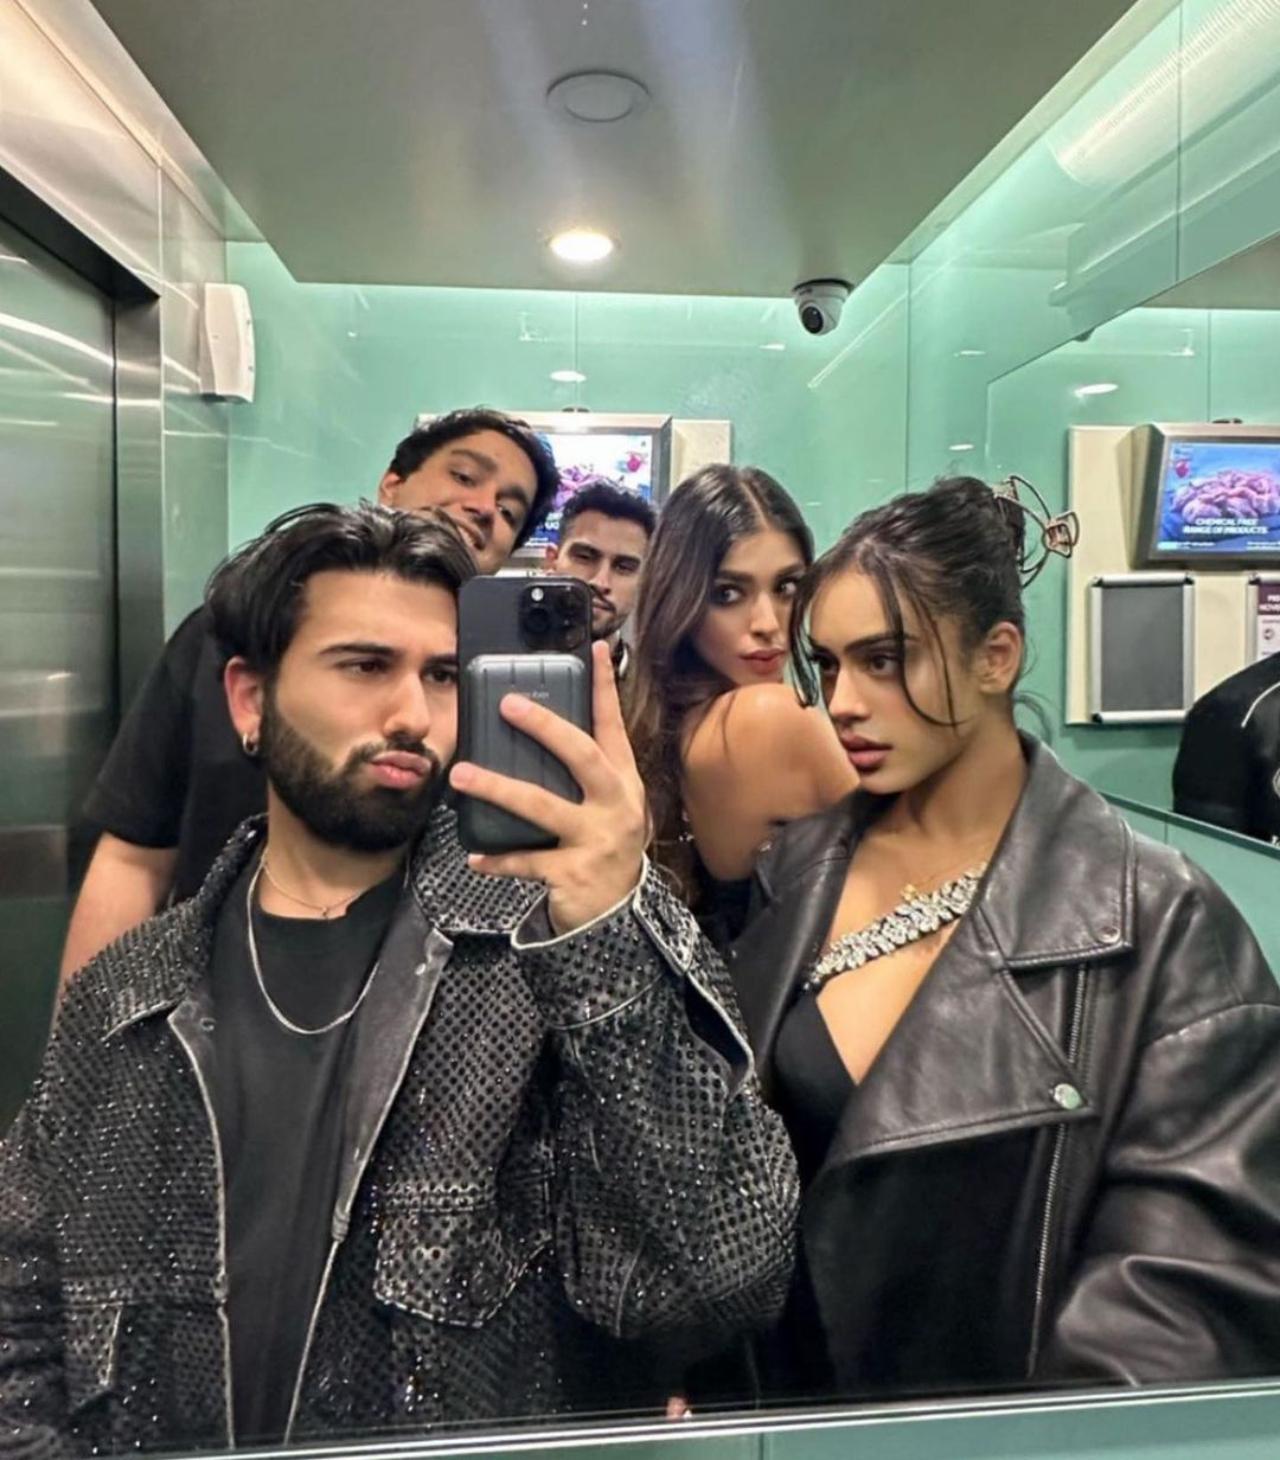 For the party, Nysa opted for an all-black look and was seen striking poses with her friends in pictures from inside the party. She had tied her hair up and opted for dramatic make-up for the night. She is seen posing for a mirror selfie with her friend, Orry